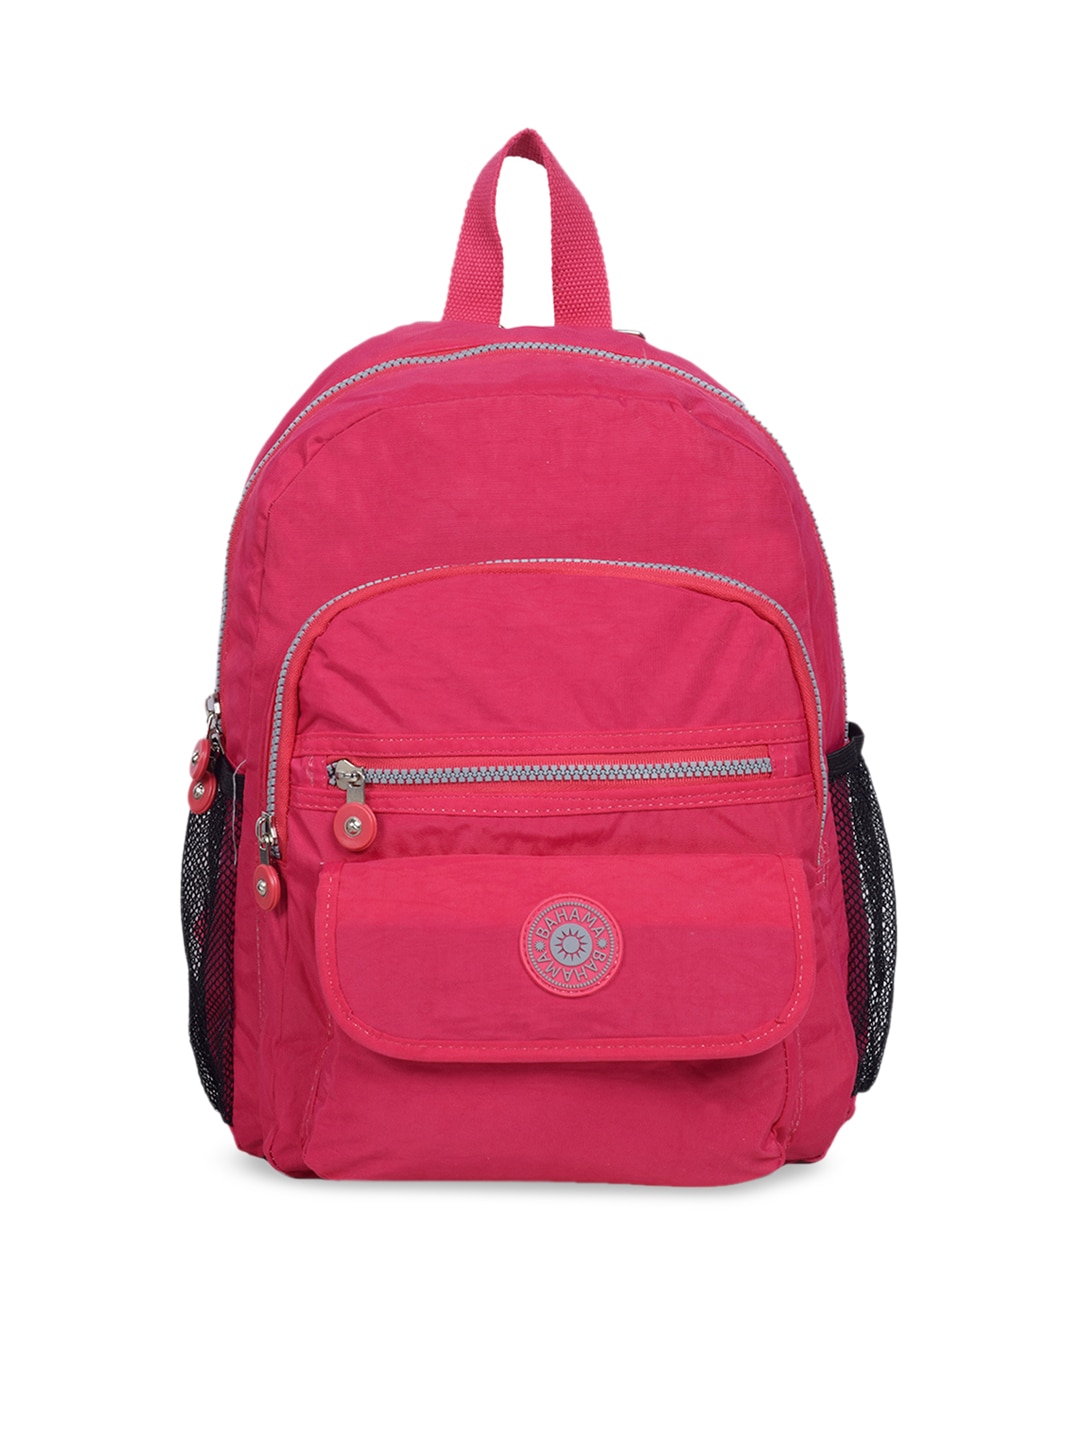 BAHAMA Crinkle Unisex Red Solid Backpack Price in India